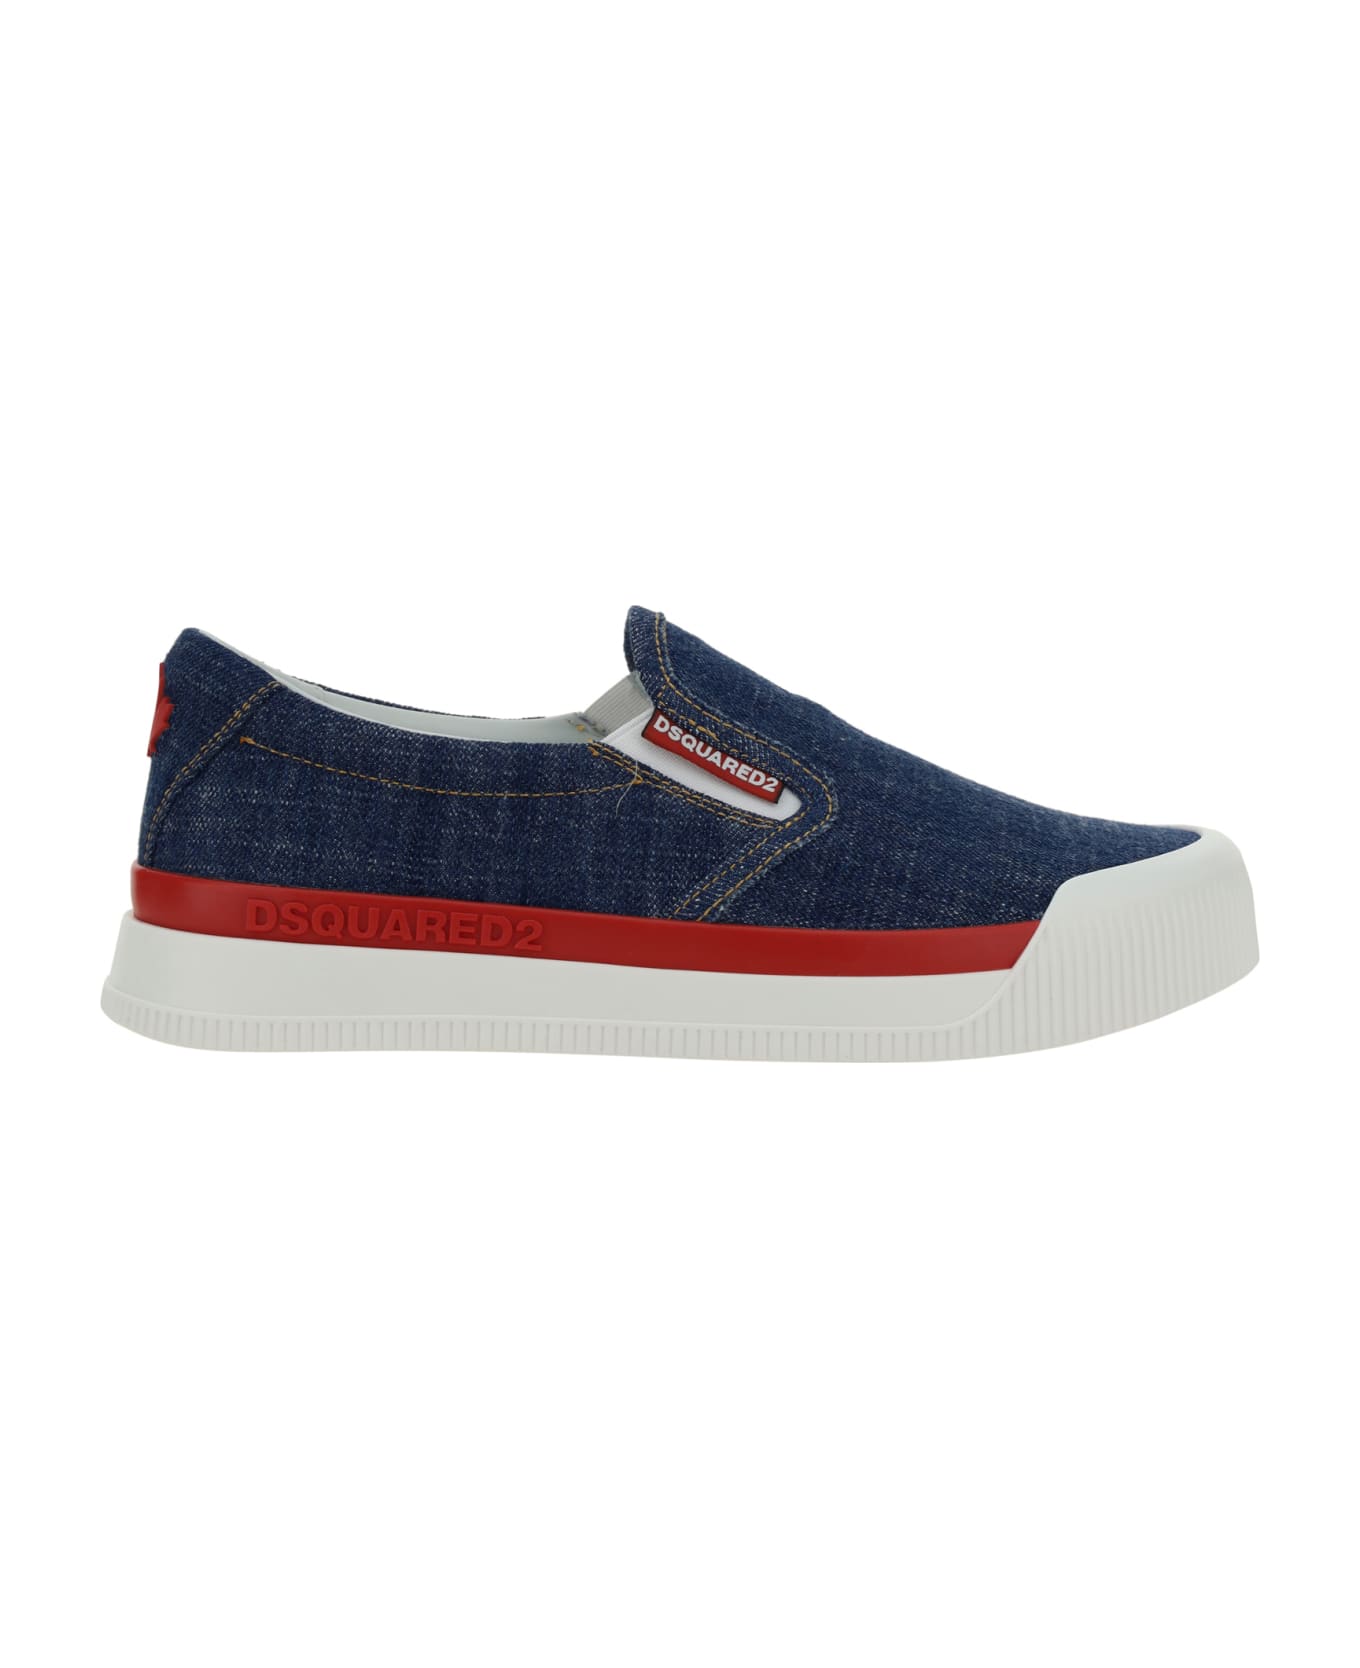 Dsquared2 Sneakers - M2852